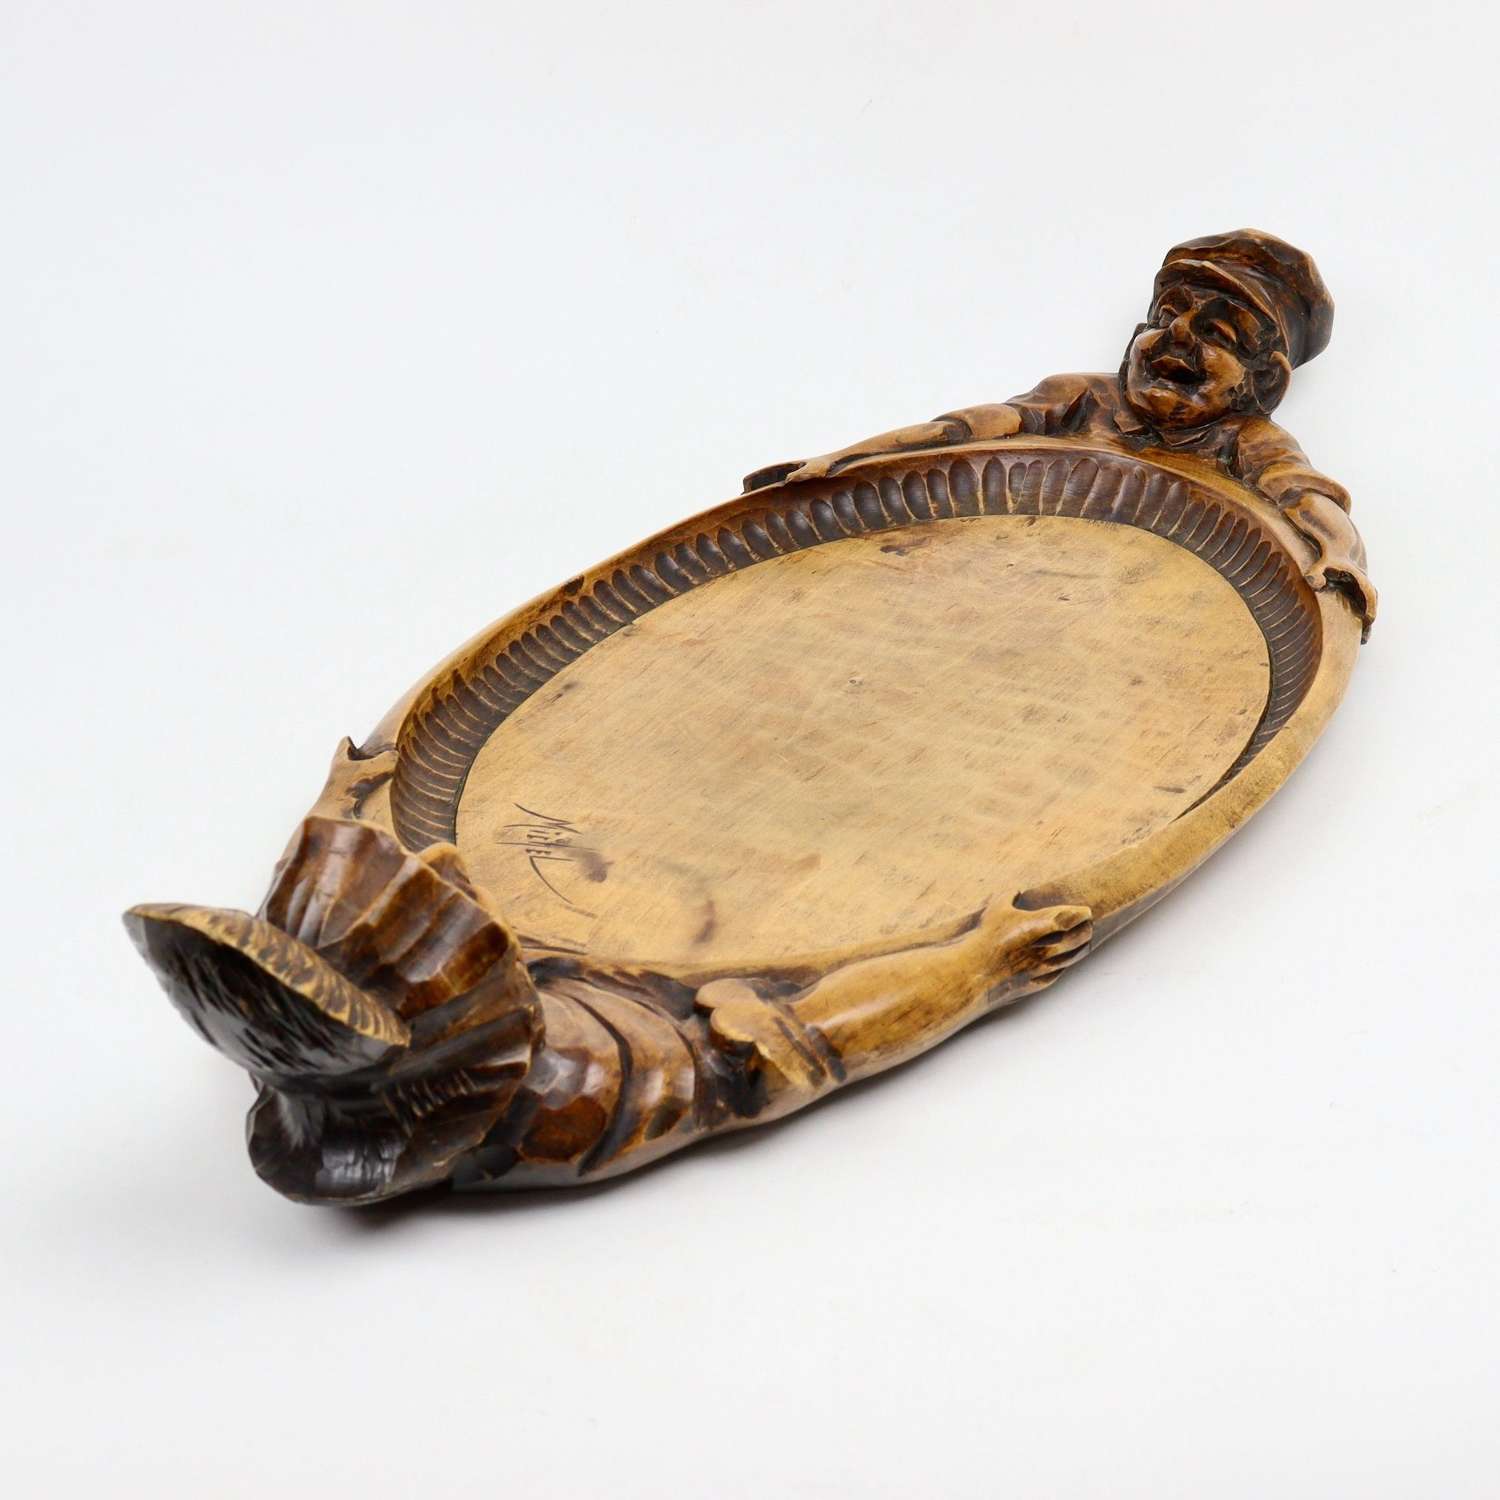 Carved Wooden Bread Tray